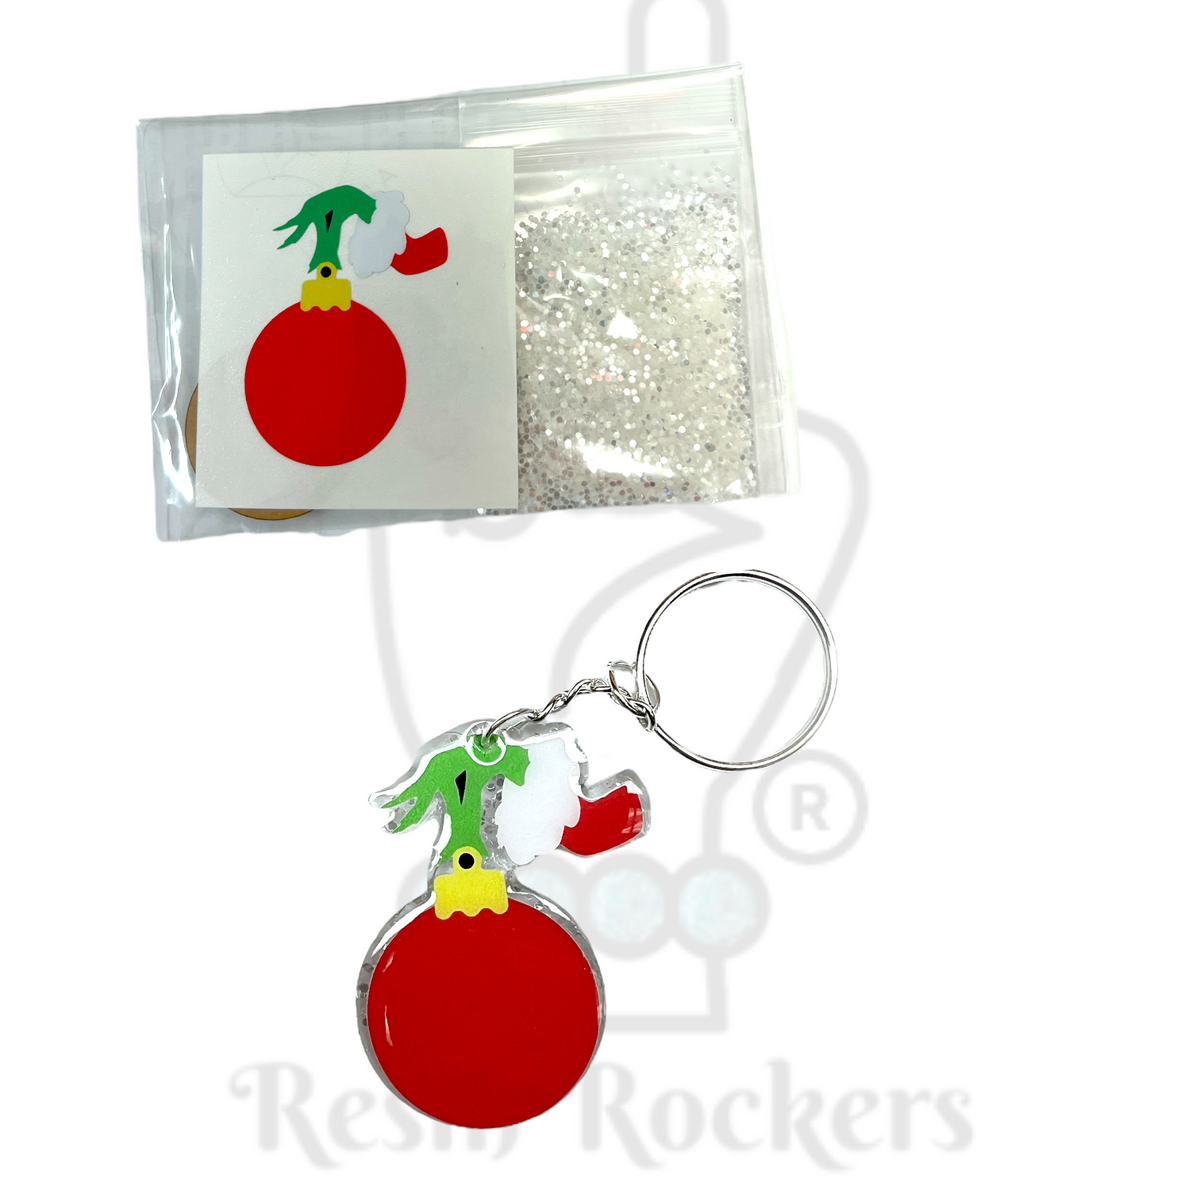 Grinchy Inspired Hand With Ornament Acrylic Blank With Decal Keychain Kit